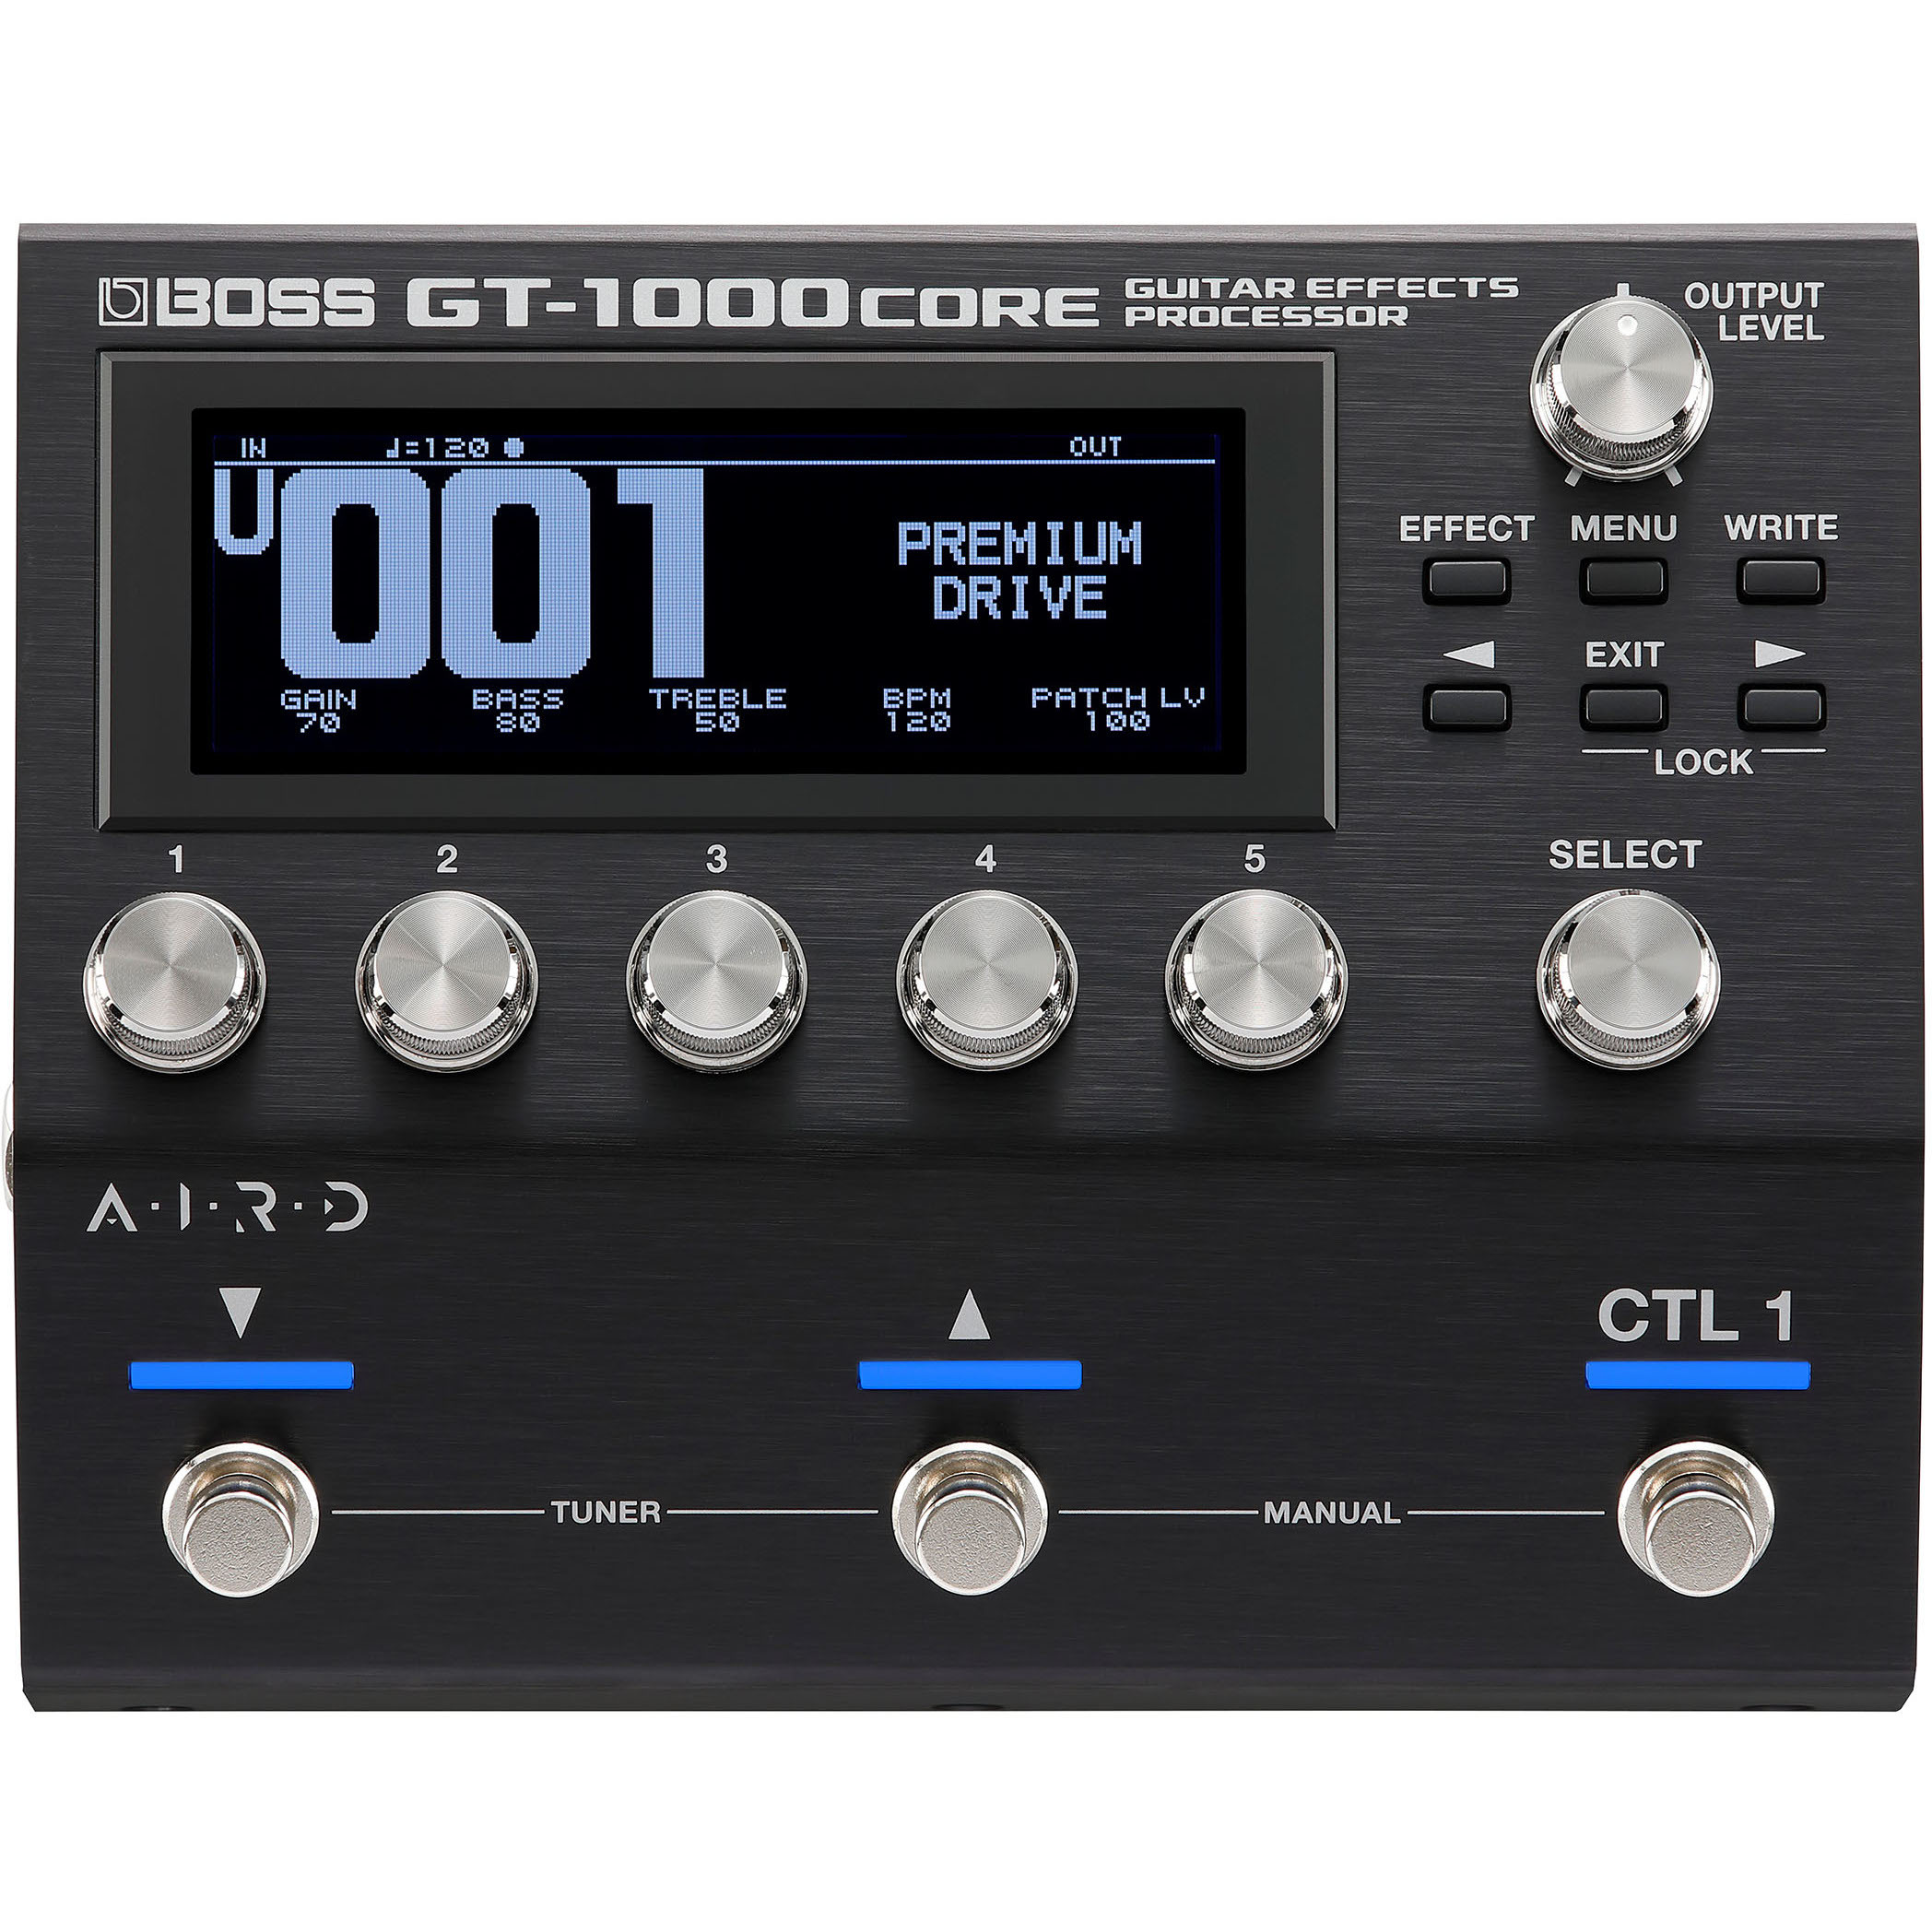 Boss Audio Systems GT-1000CORE Guitar Effects Processor